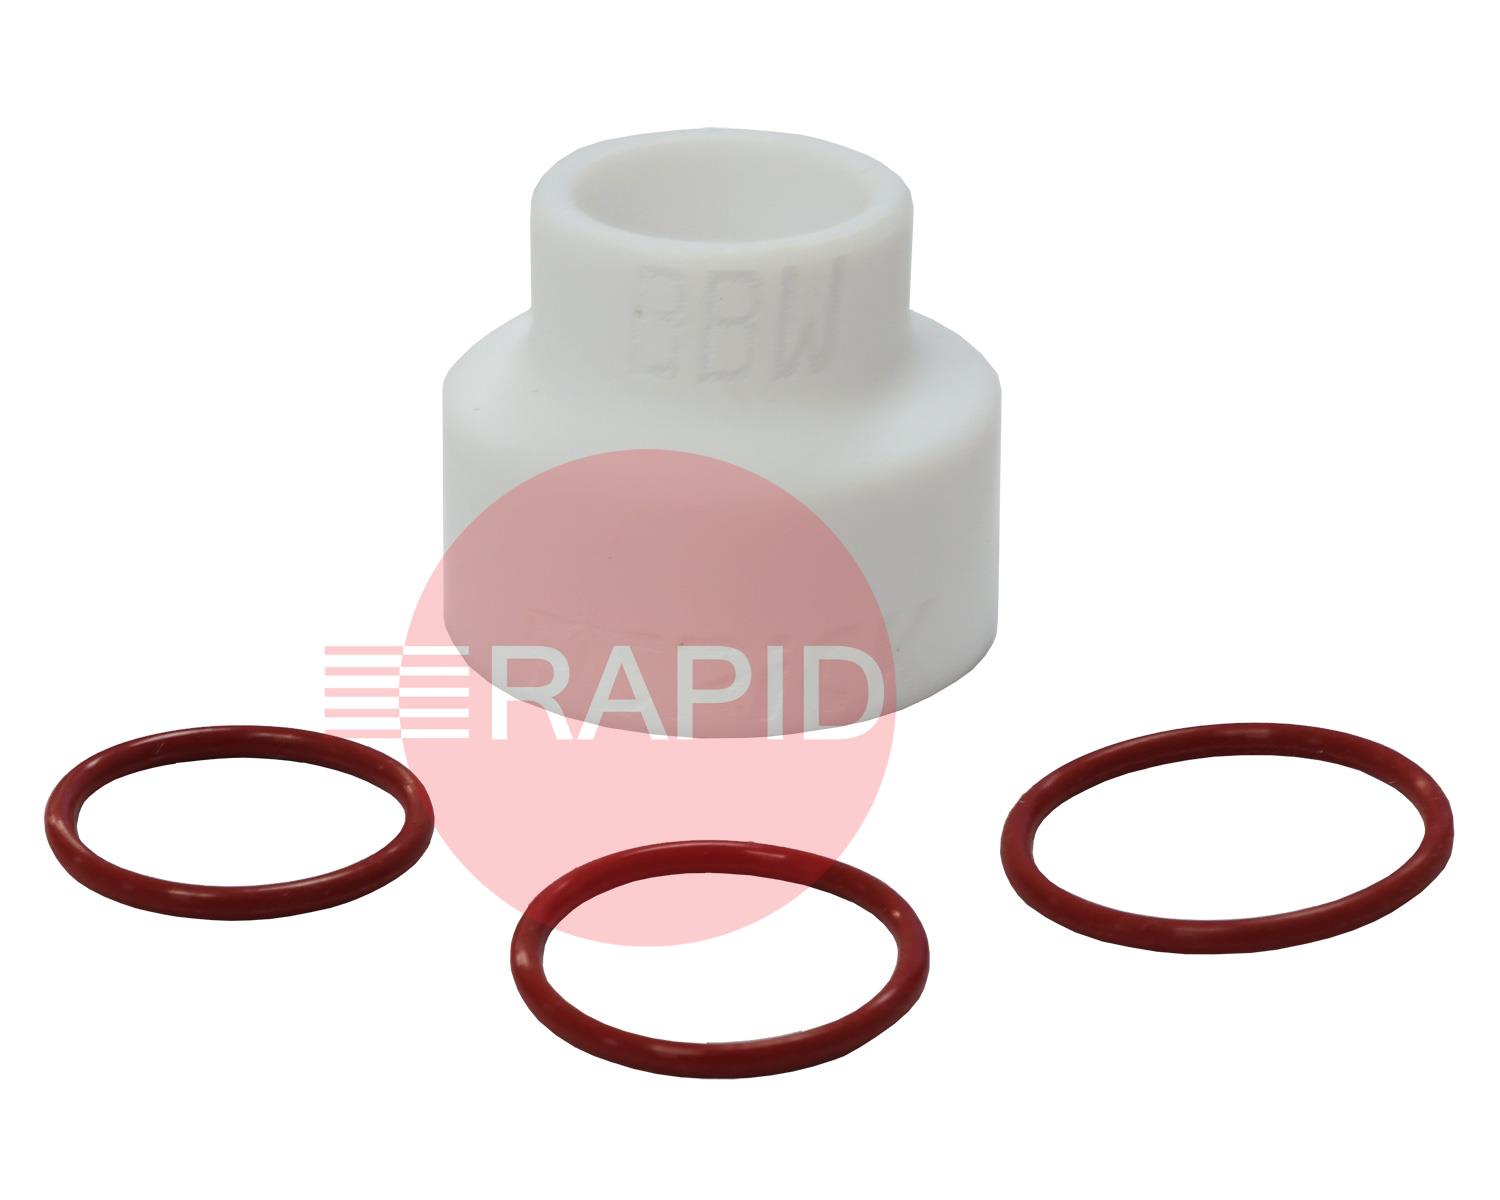 CIPSG19  Furick BBW CIPPY SG19 Replacement Thermoplastic Cup, with 3x O-Rings